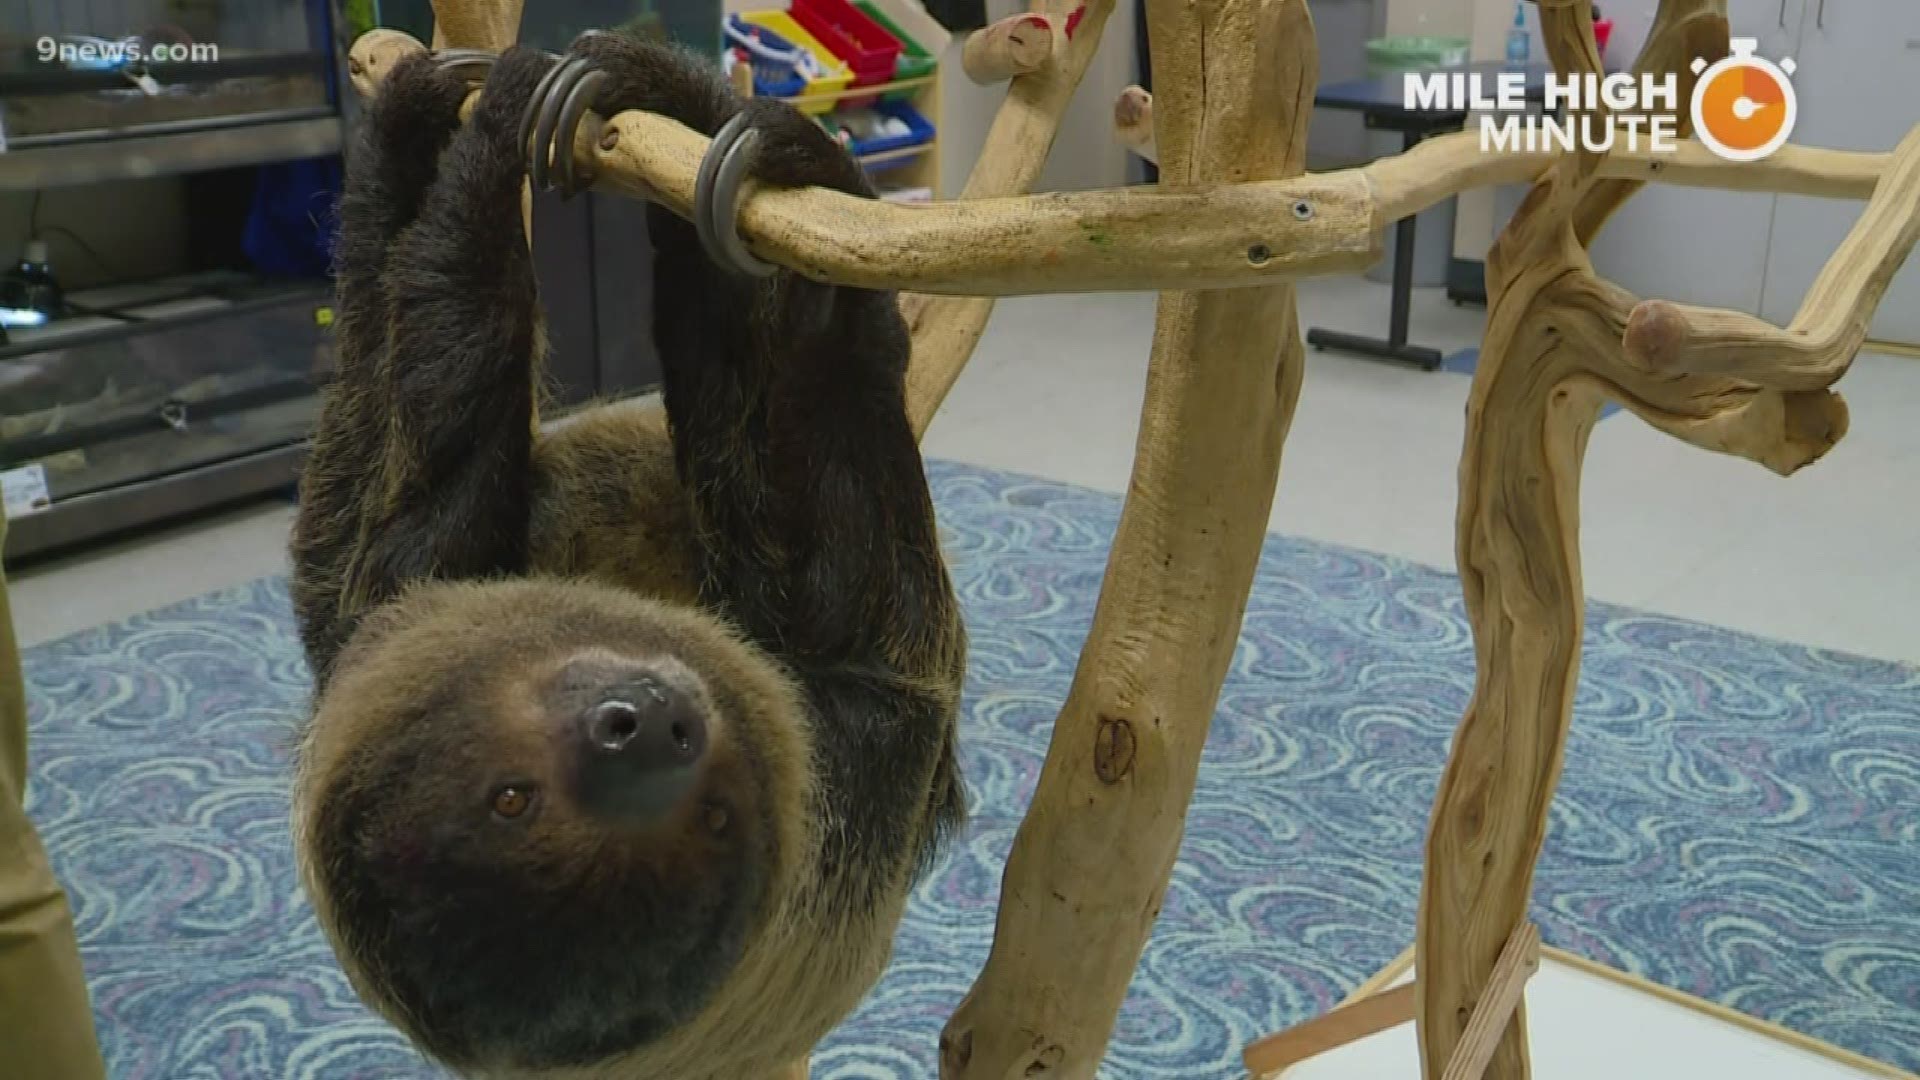 There's an entire weekend at the Denver Aquarium that's dedicated to the sloth.